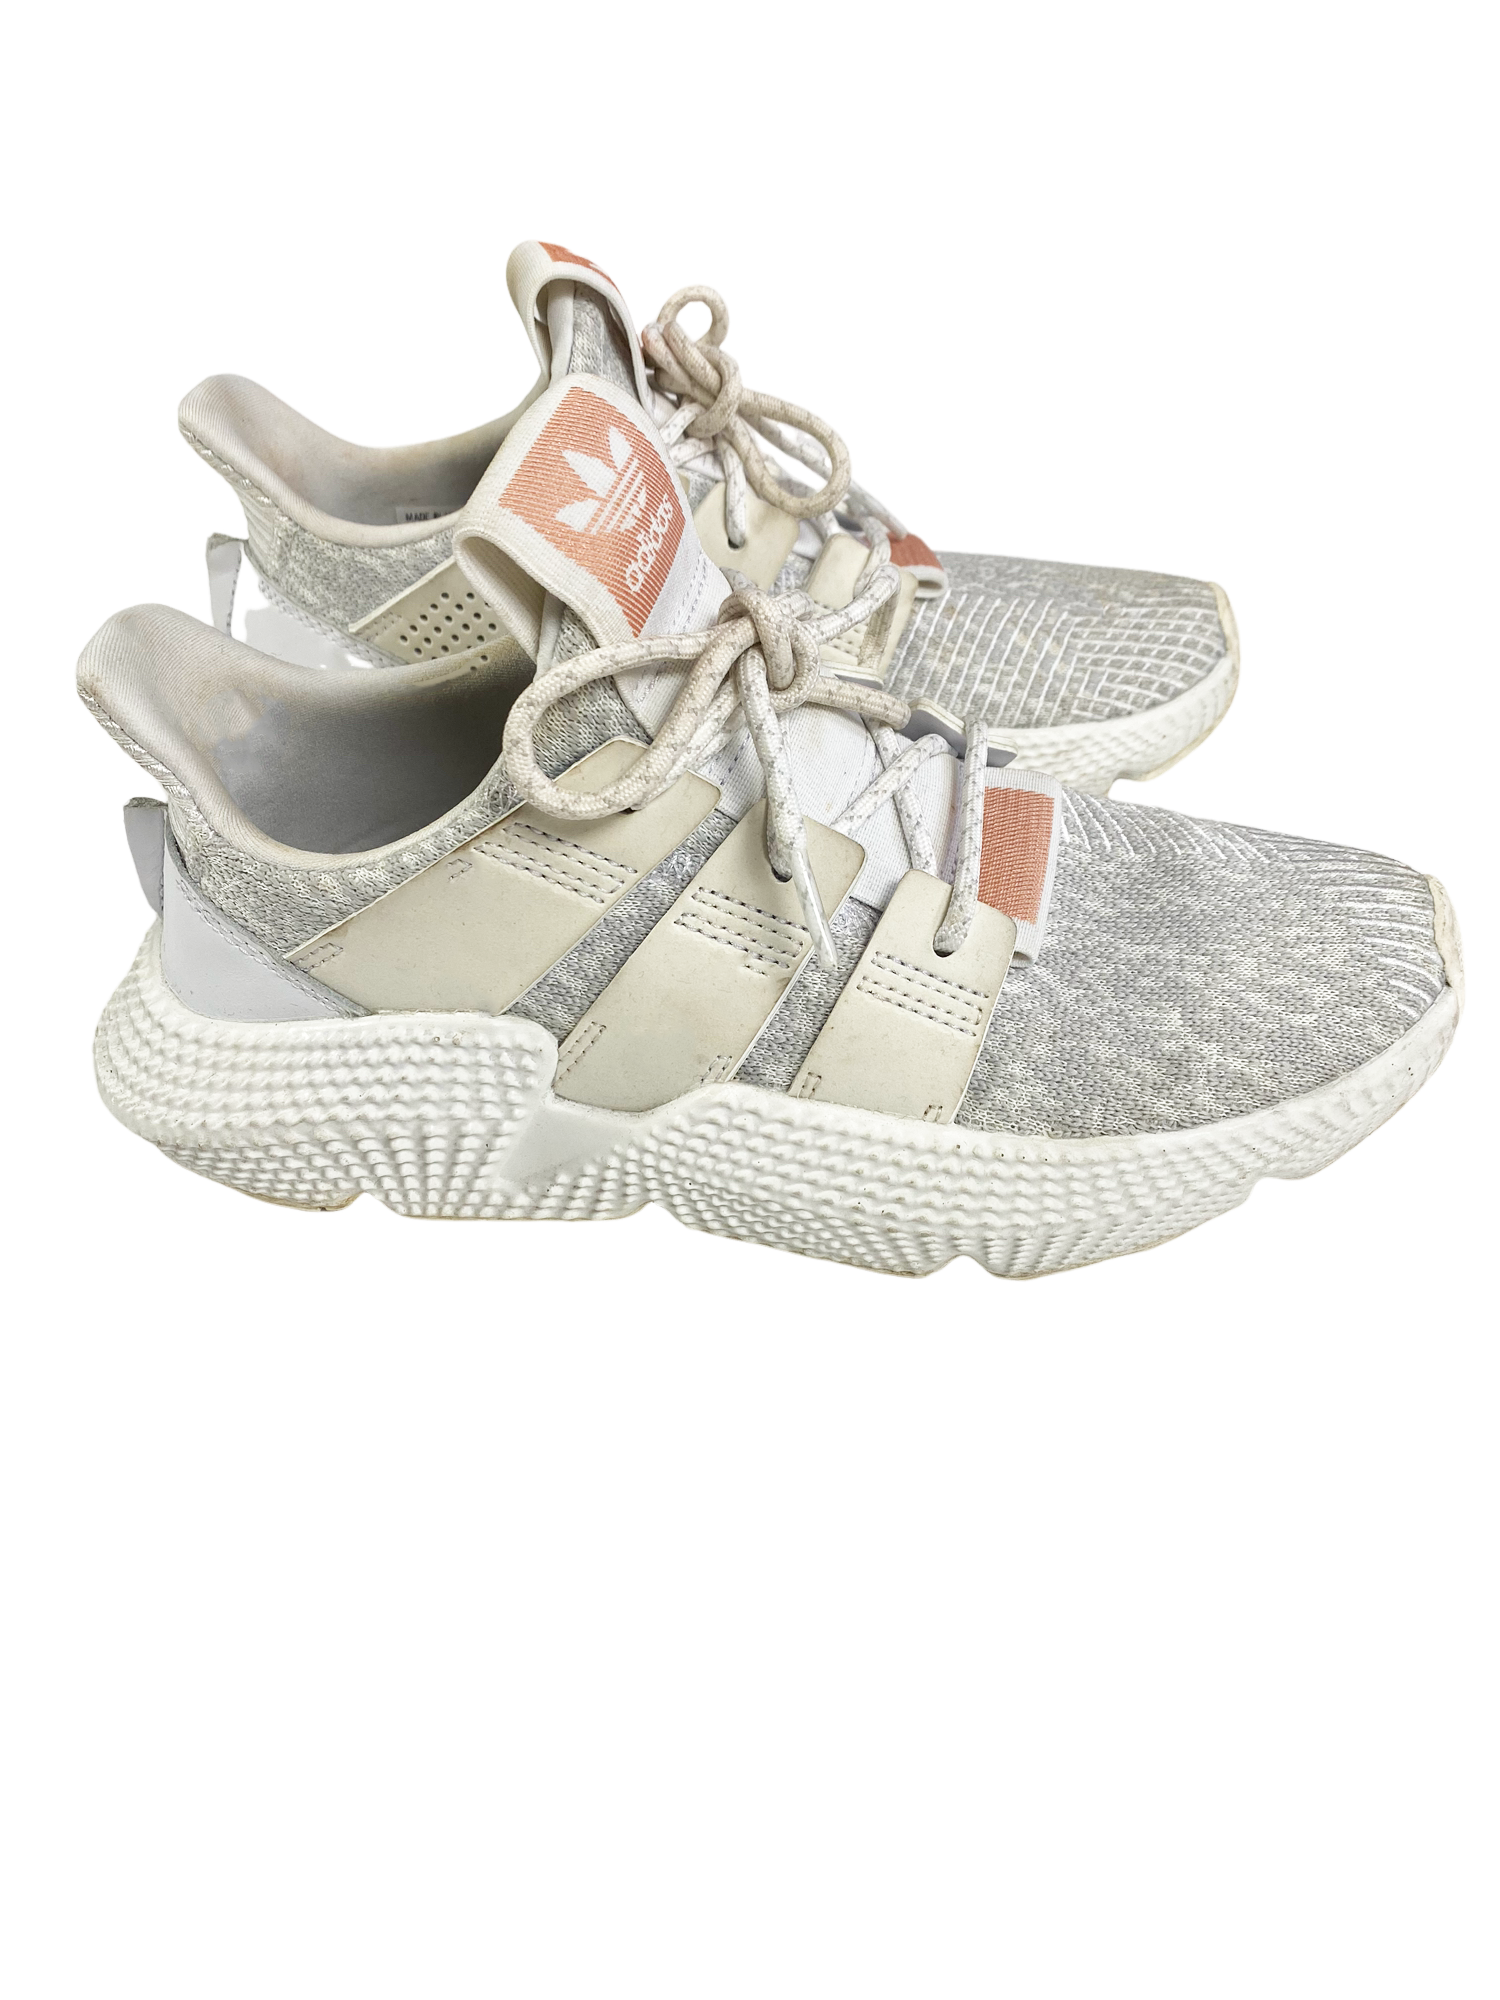 adidas Prophere Running sneakers | size 6 or EU 37 1/2